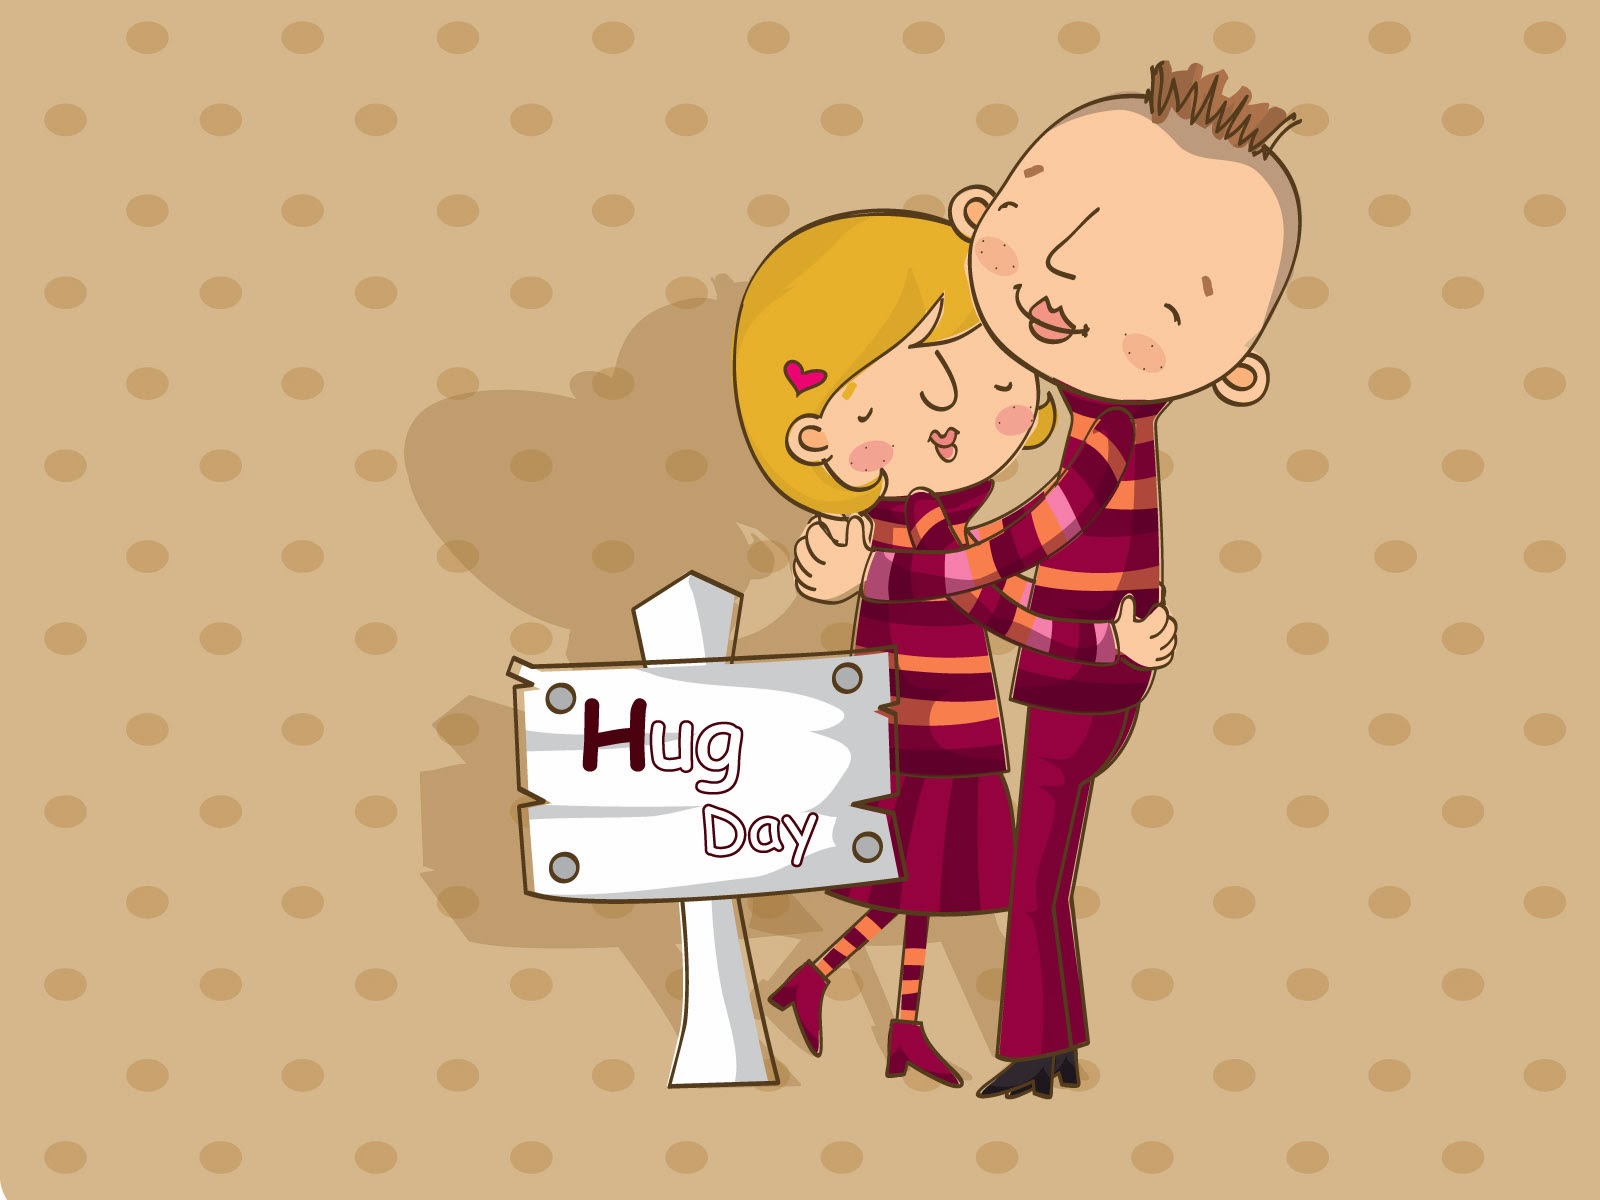 Hug Day 2014 Wishes, Greetings, Quotes, Messages, Wallpapers, Images